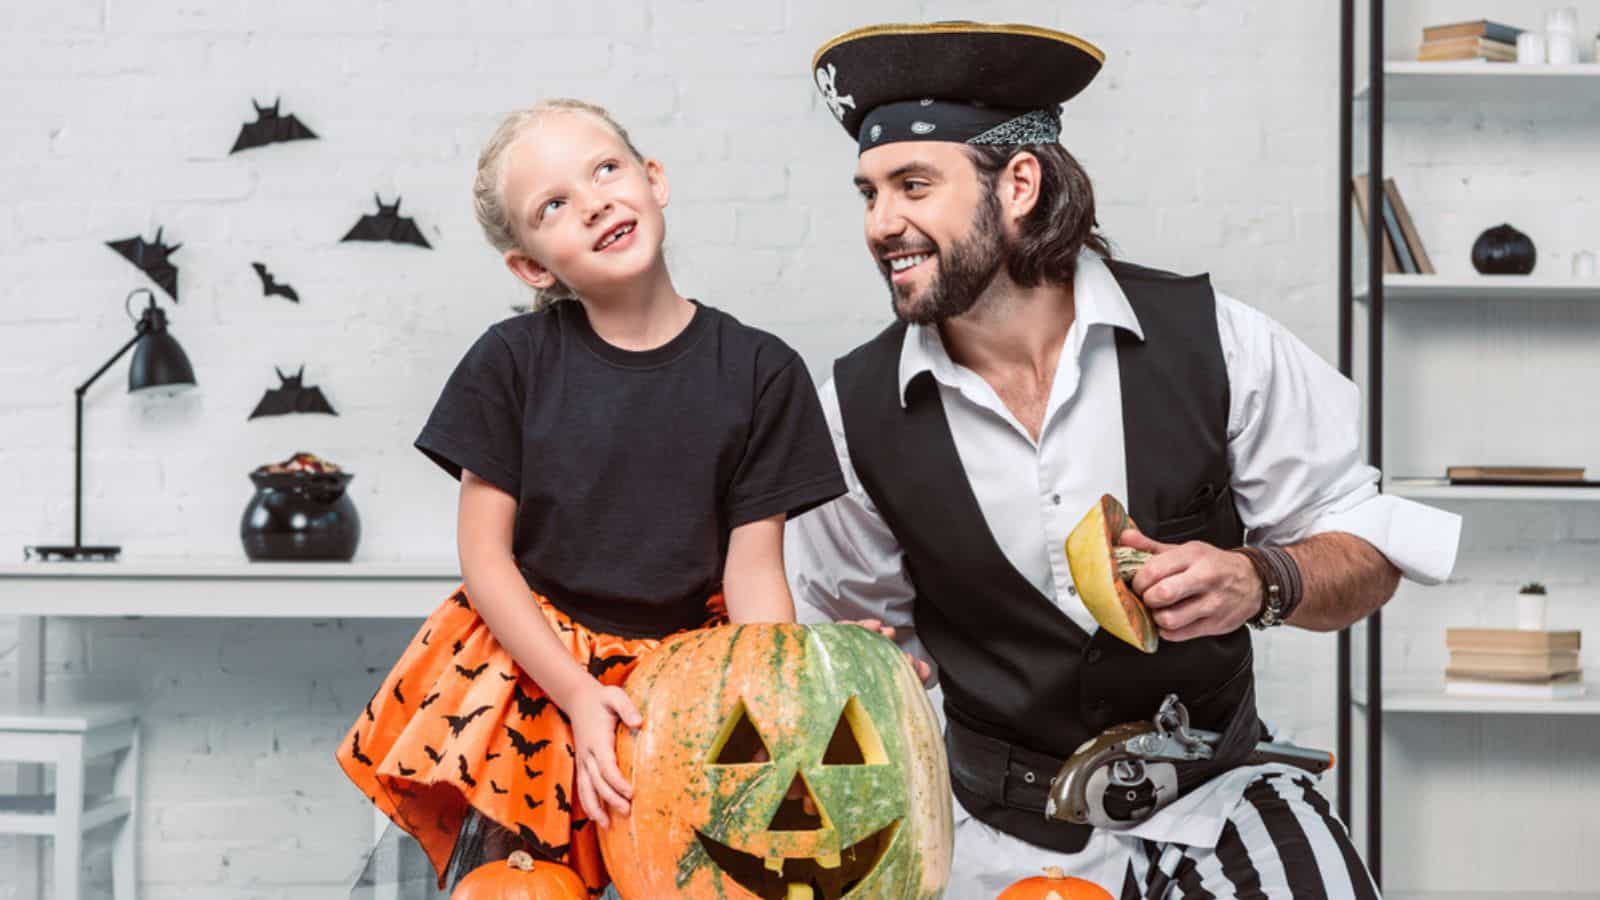 Smiling father and daughter in halloween costumes at table